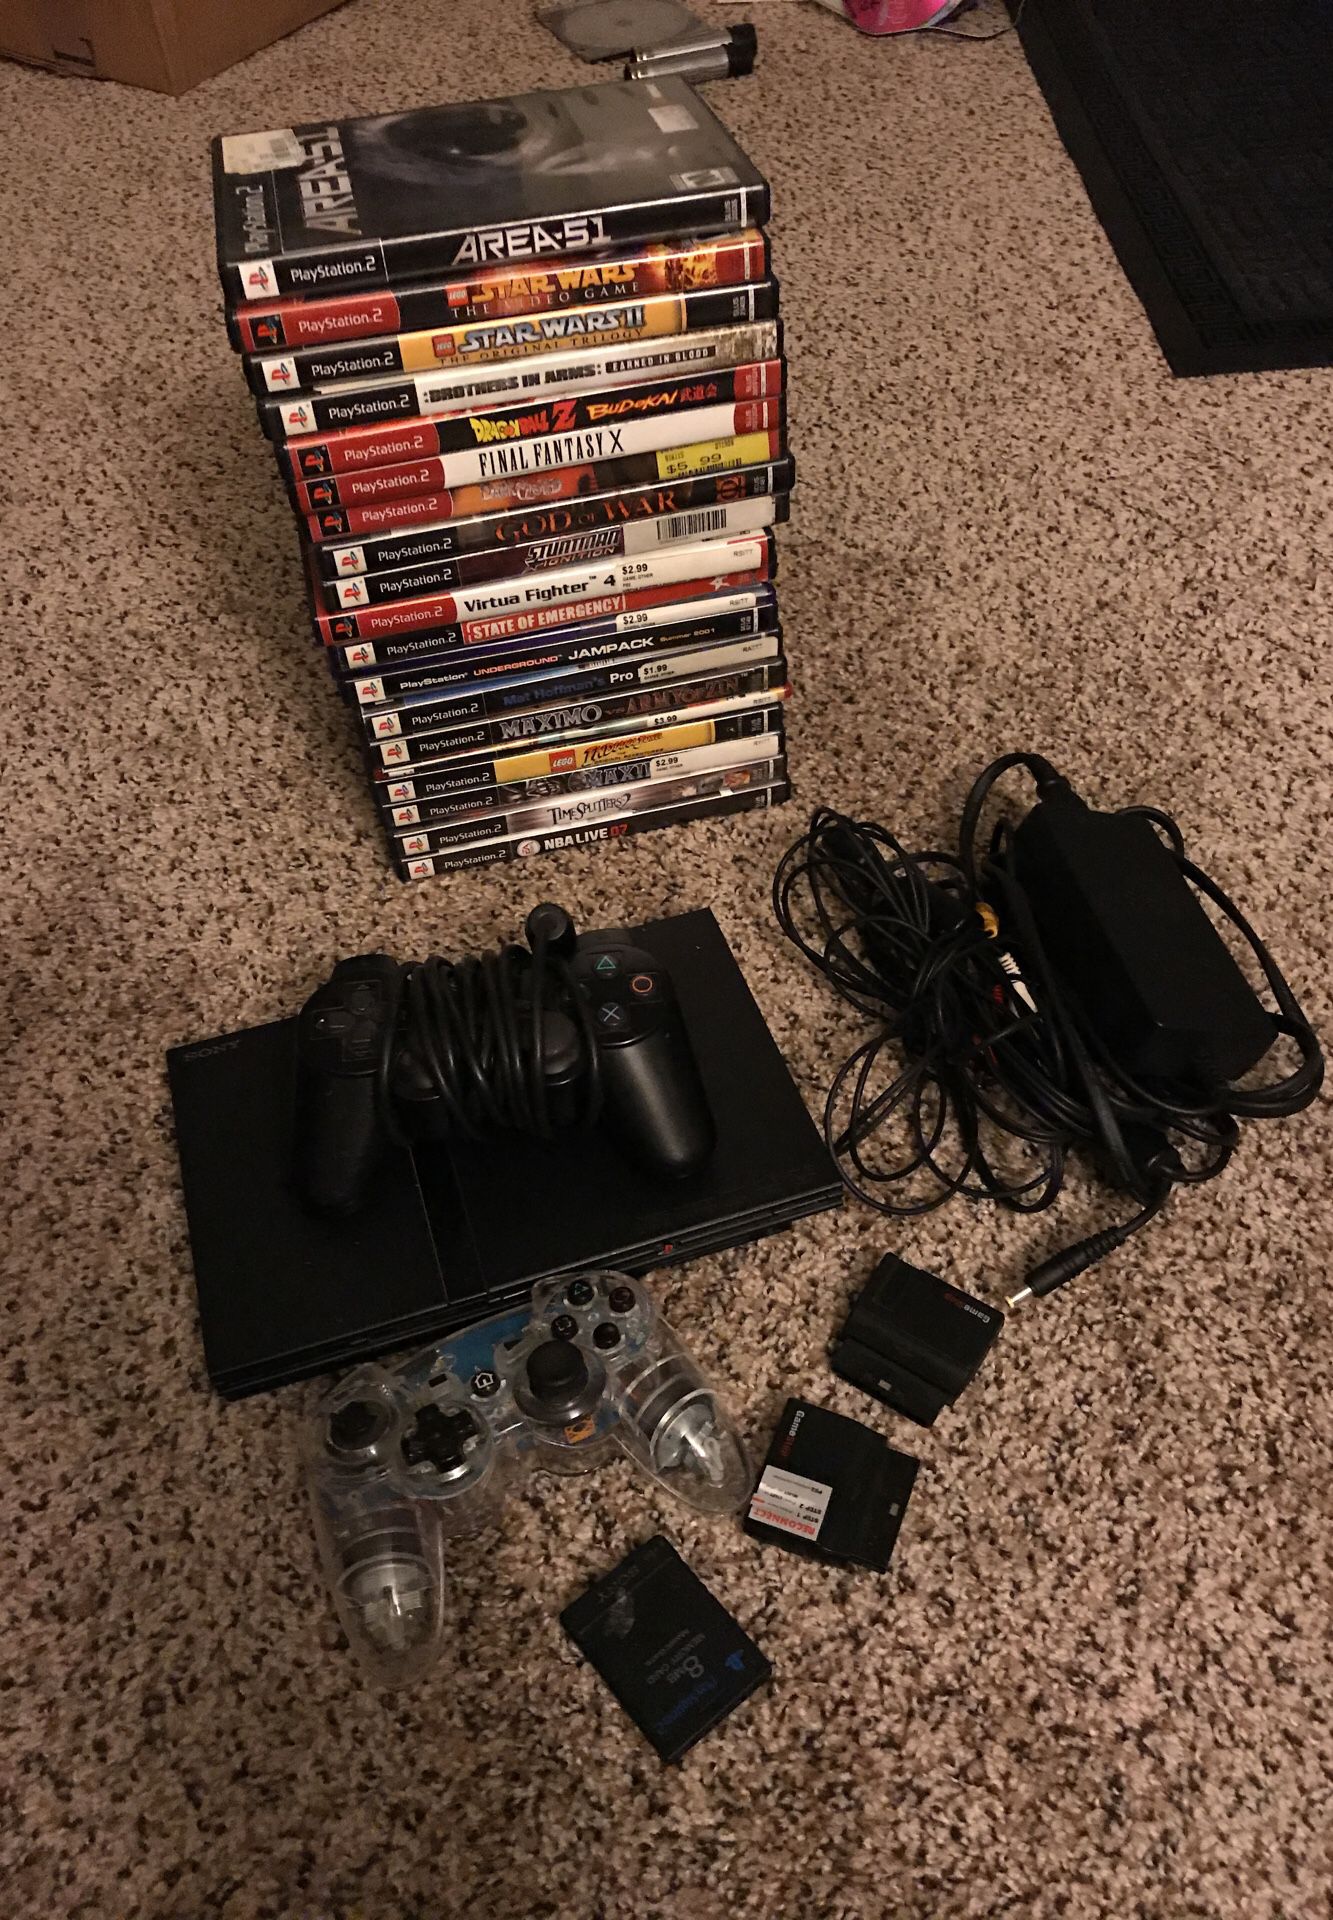 Ps2 and games